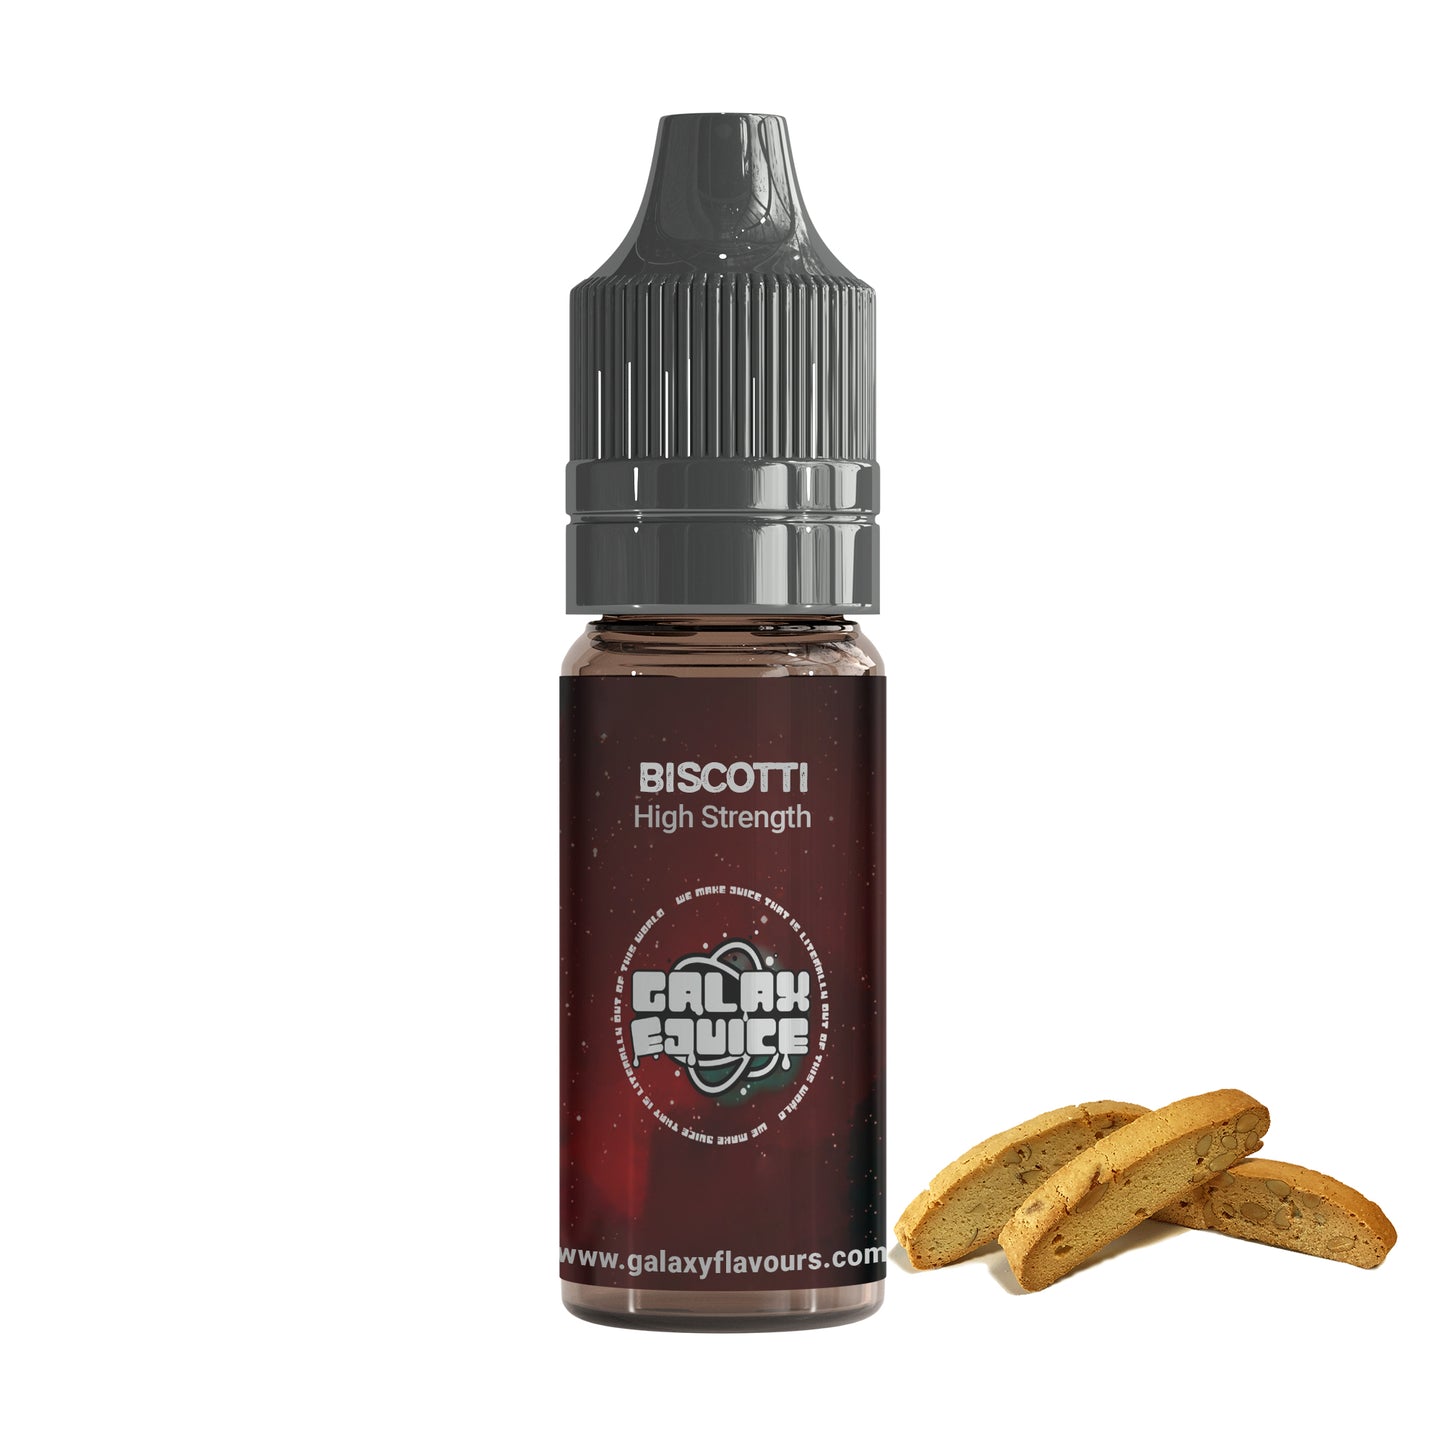 Biscotti High Strength Professional Flavouring.